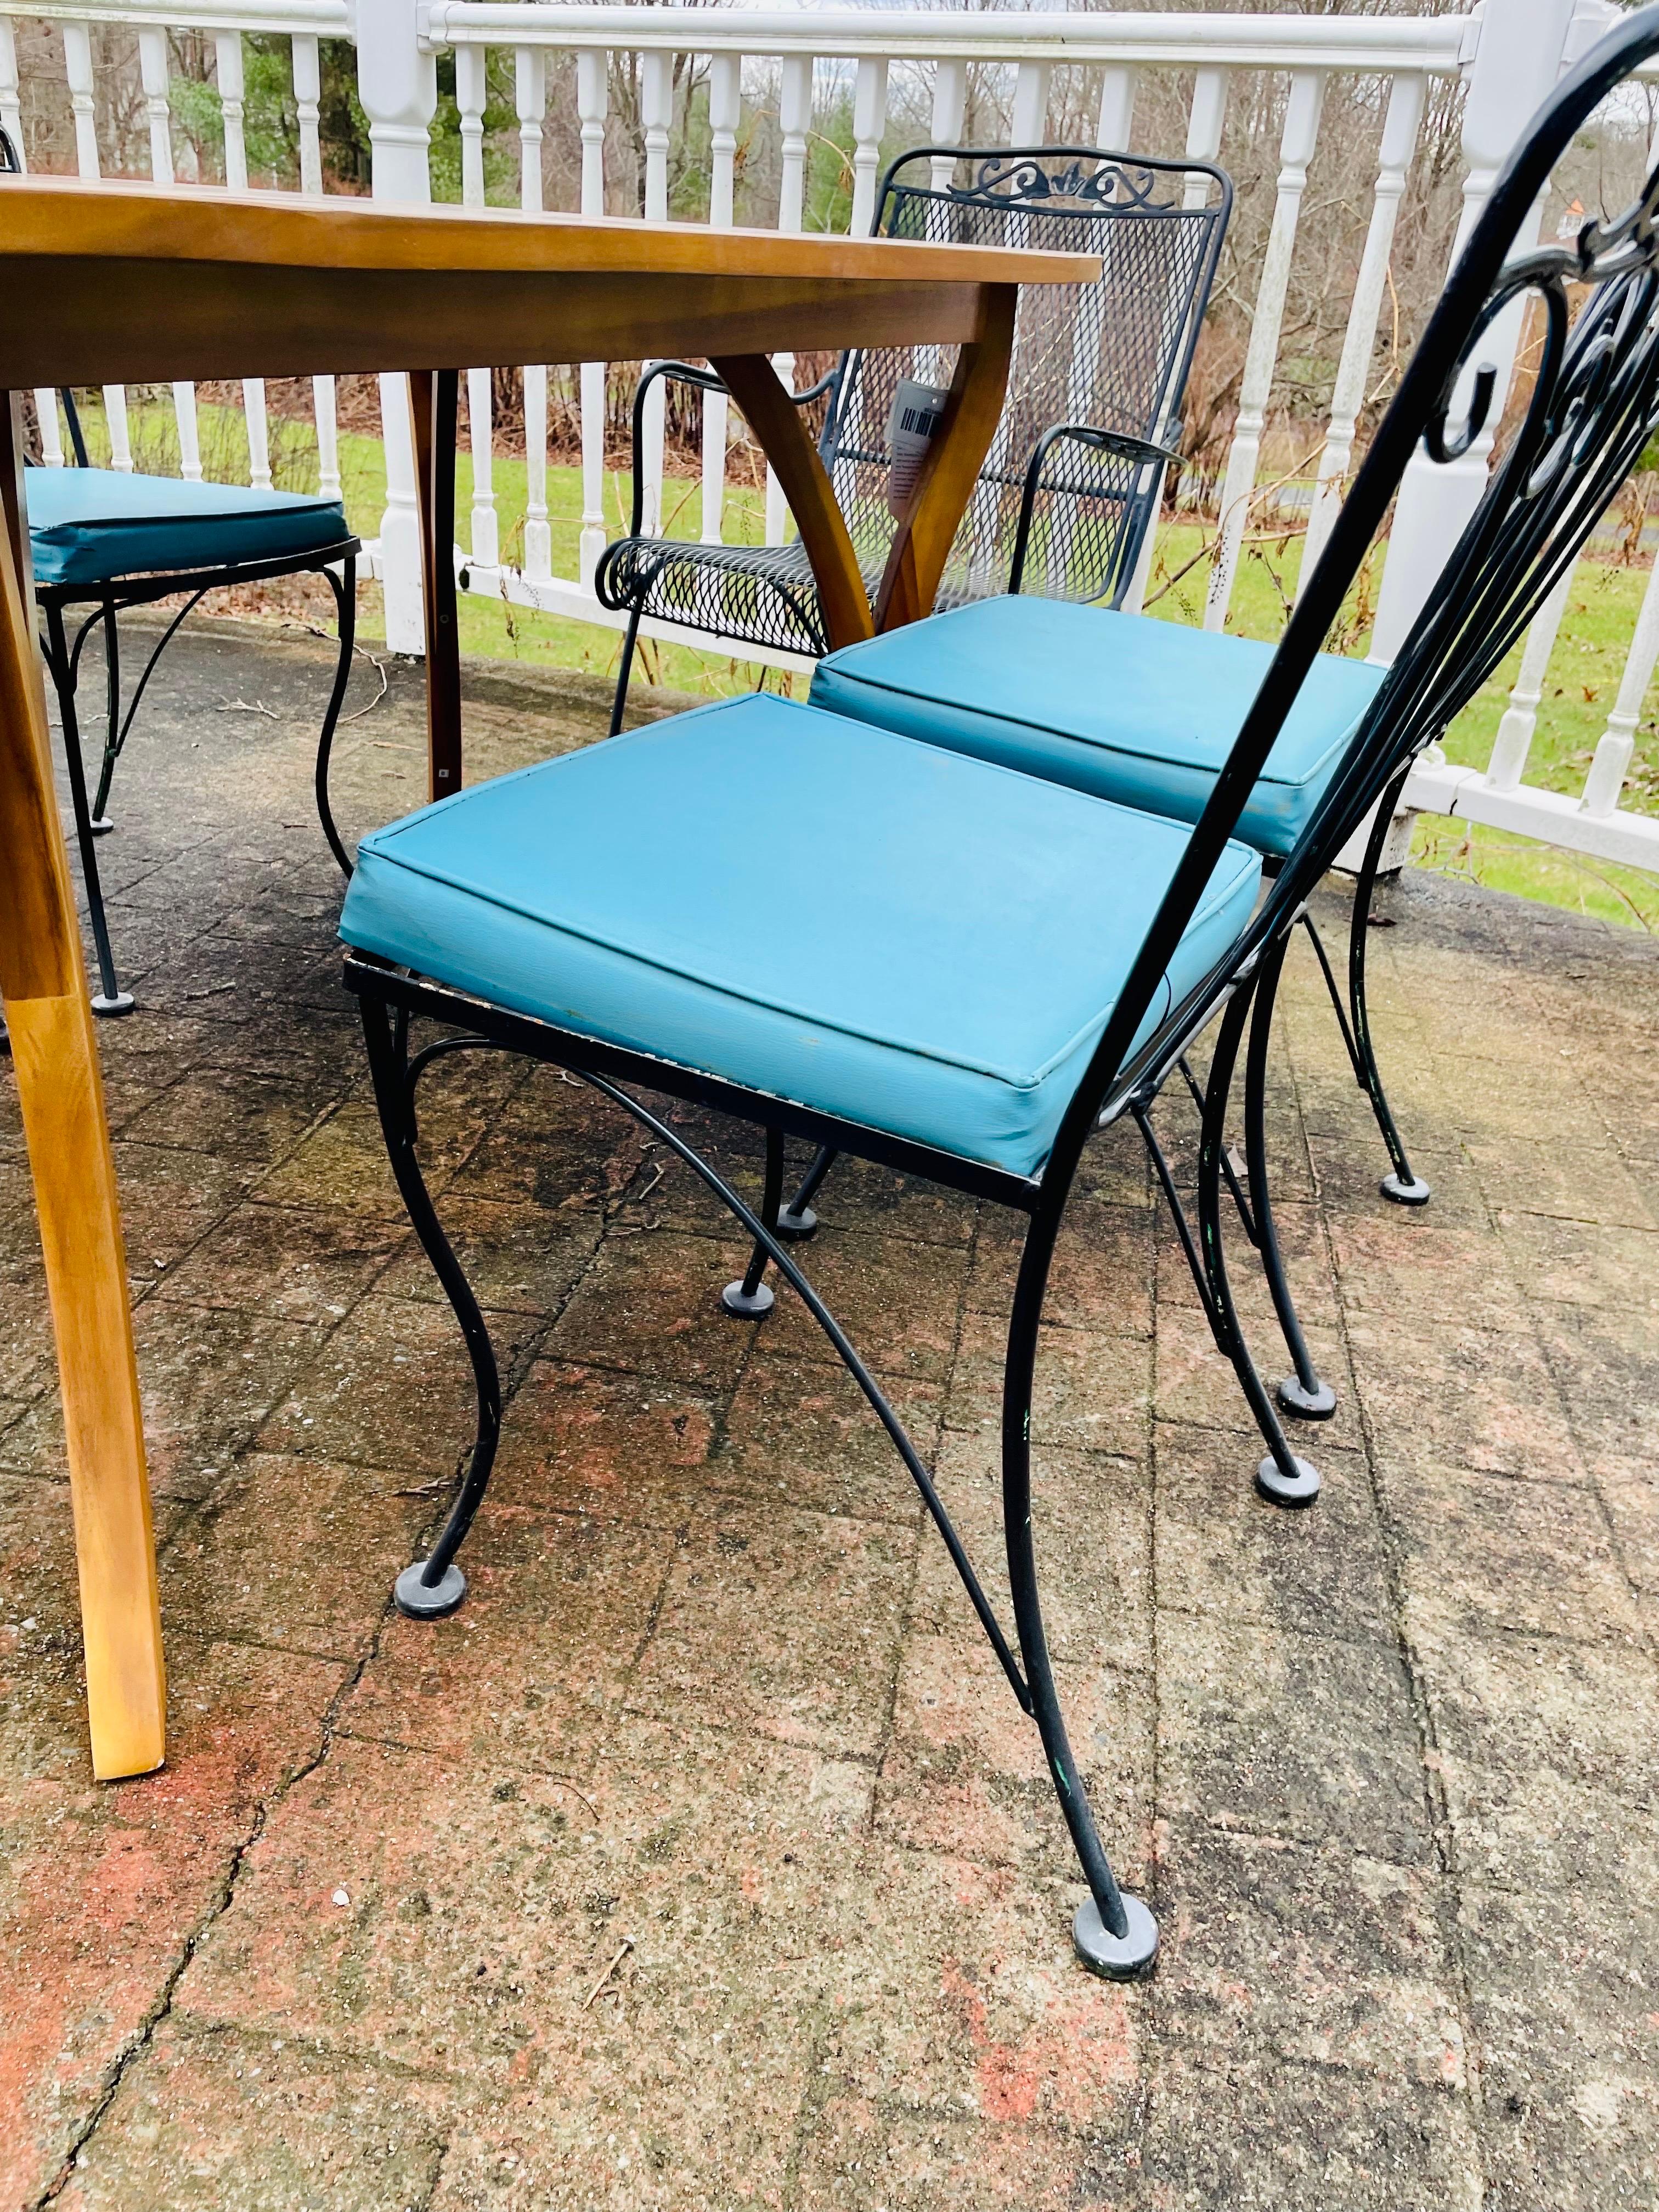 Vintage Wrought Iron Patio Furniture Seating Chairs with Teak Table In Good Condition For Sale In Cumberland, RI